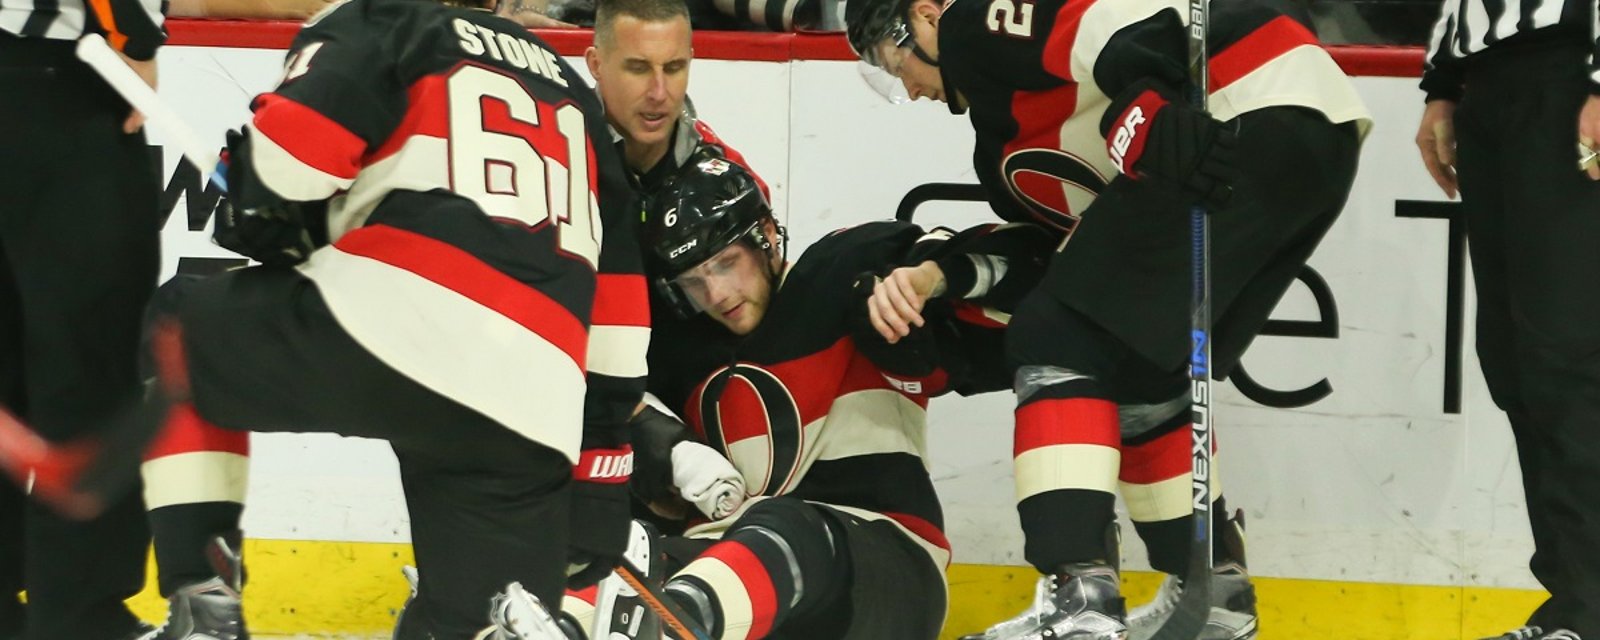 Breaking : Another star forward injured for the Senators.